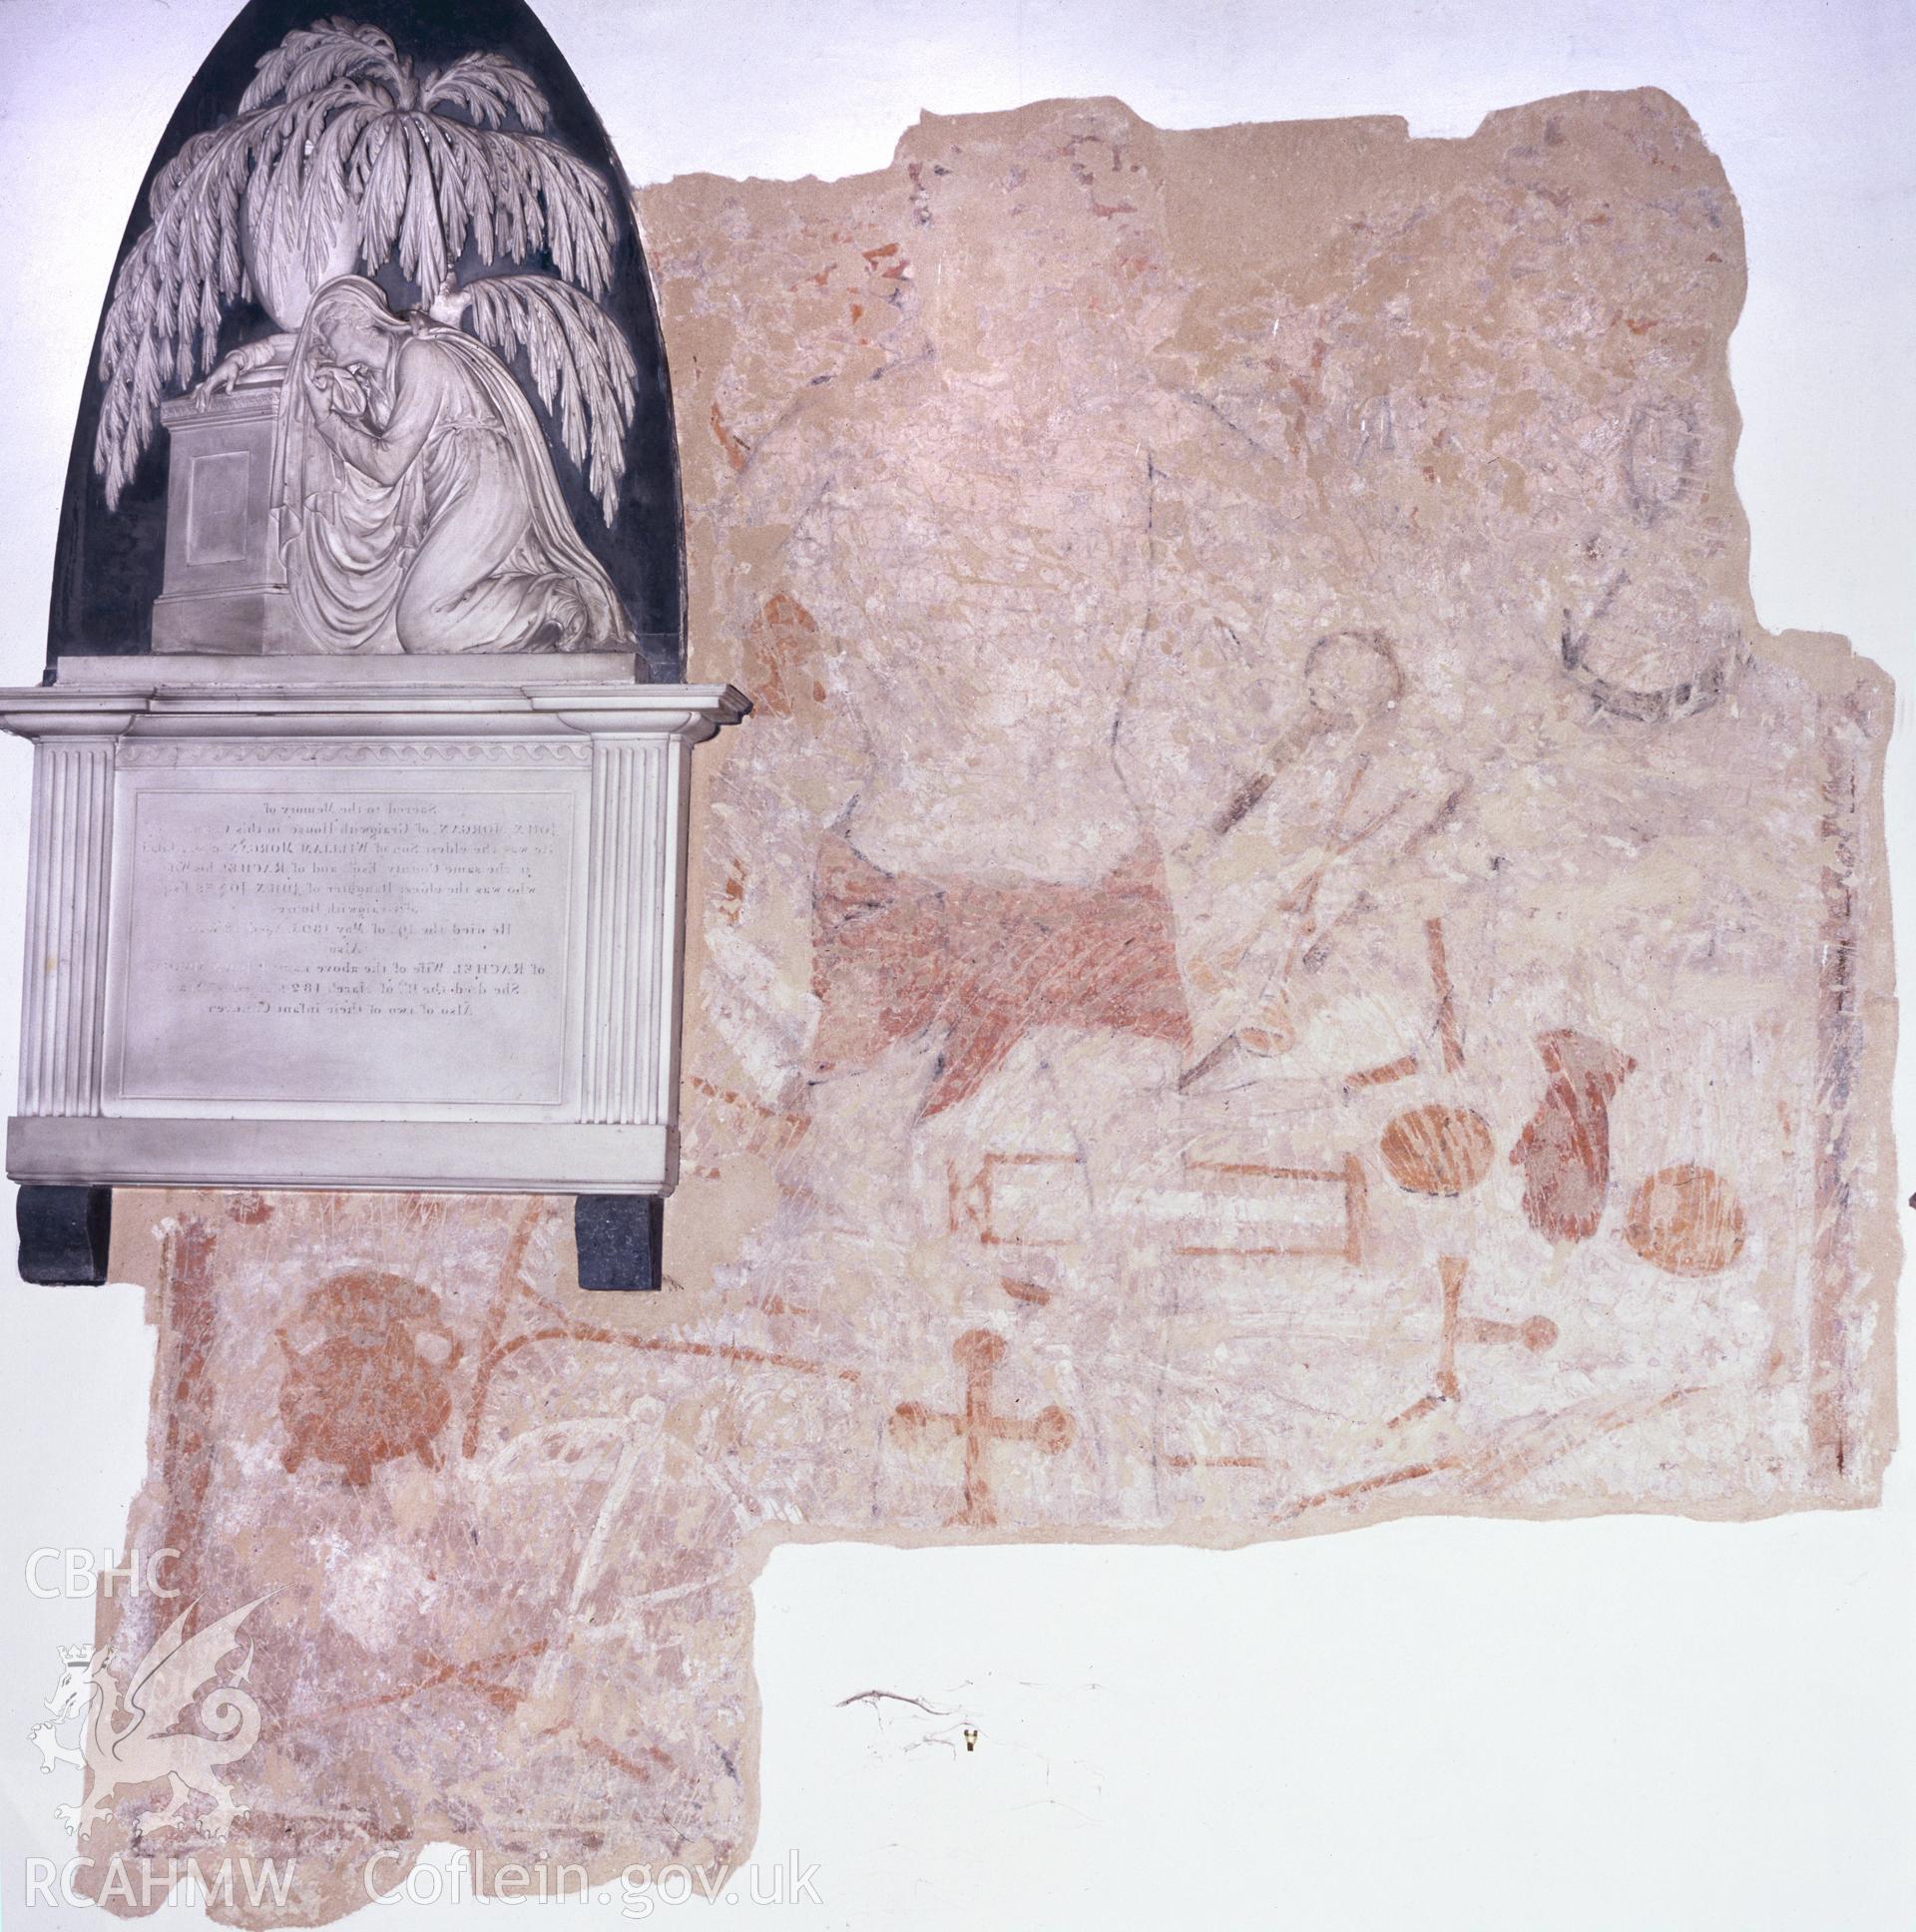 RCAHMW colour transparency showing a figure and icons in St Cybis Church, Llangybi, taken by RCAHMW